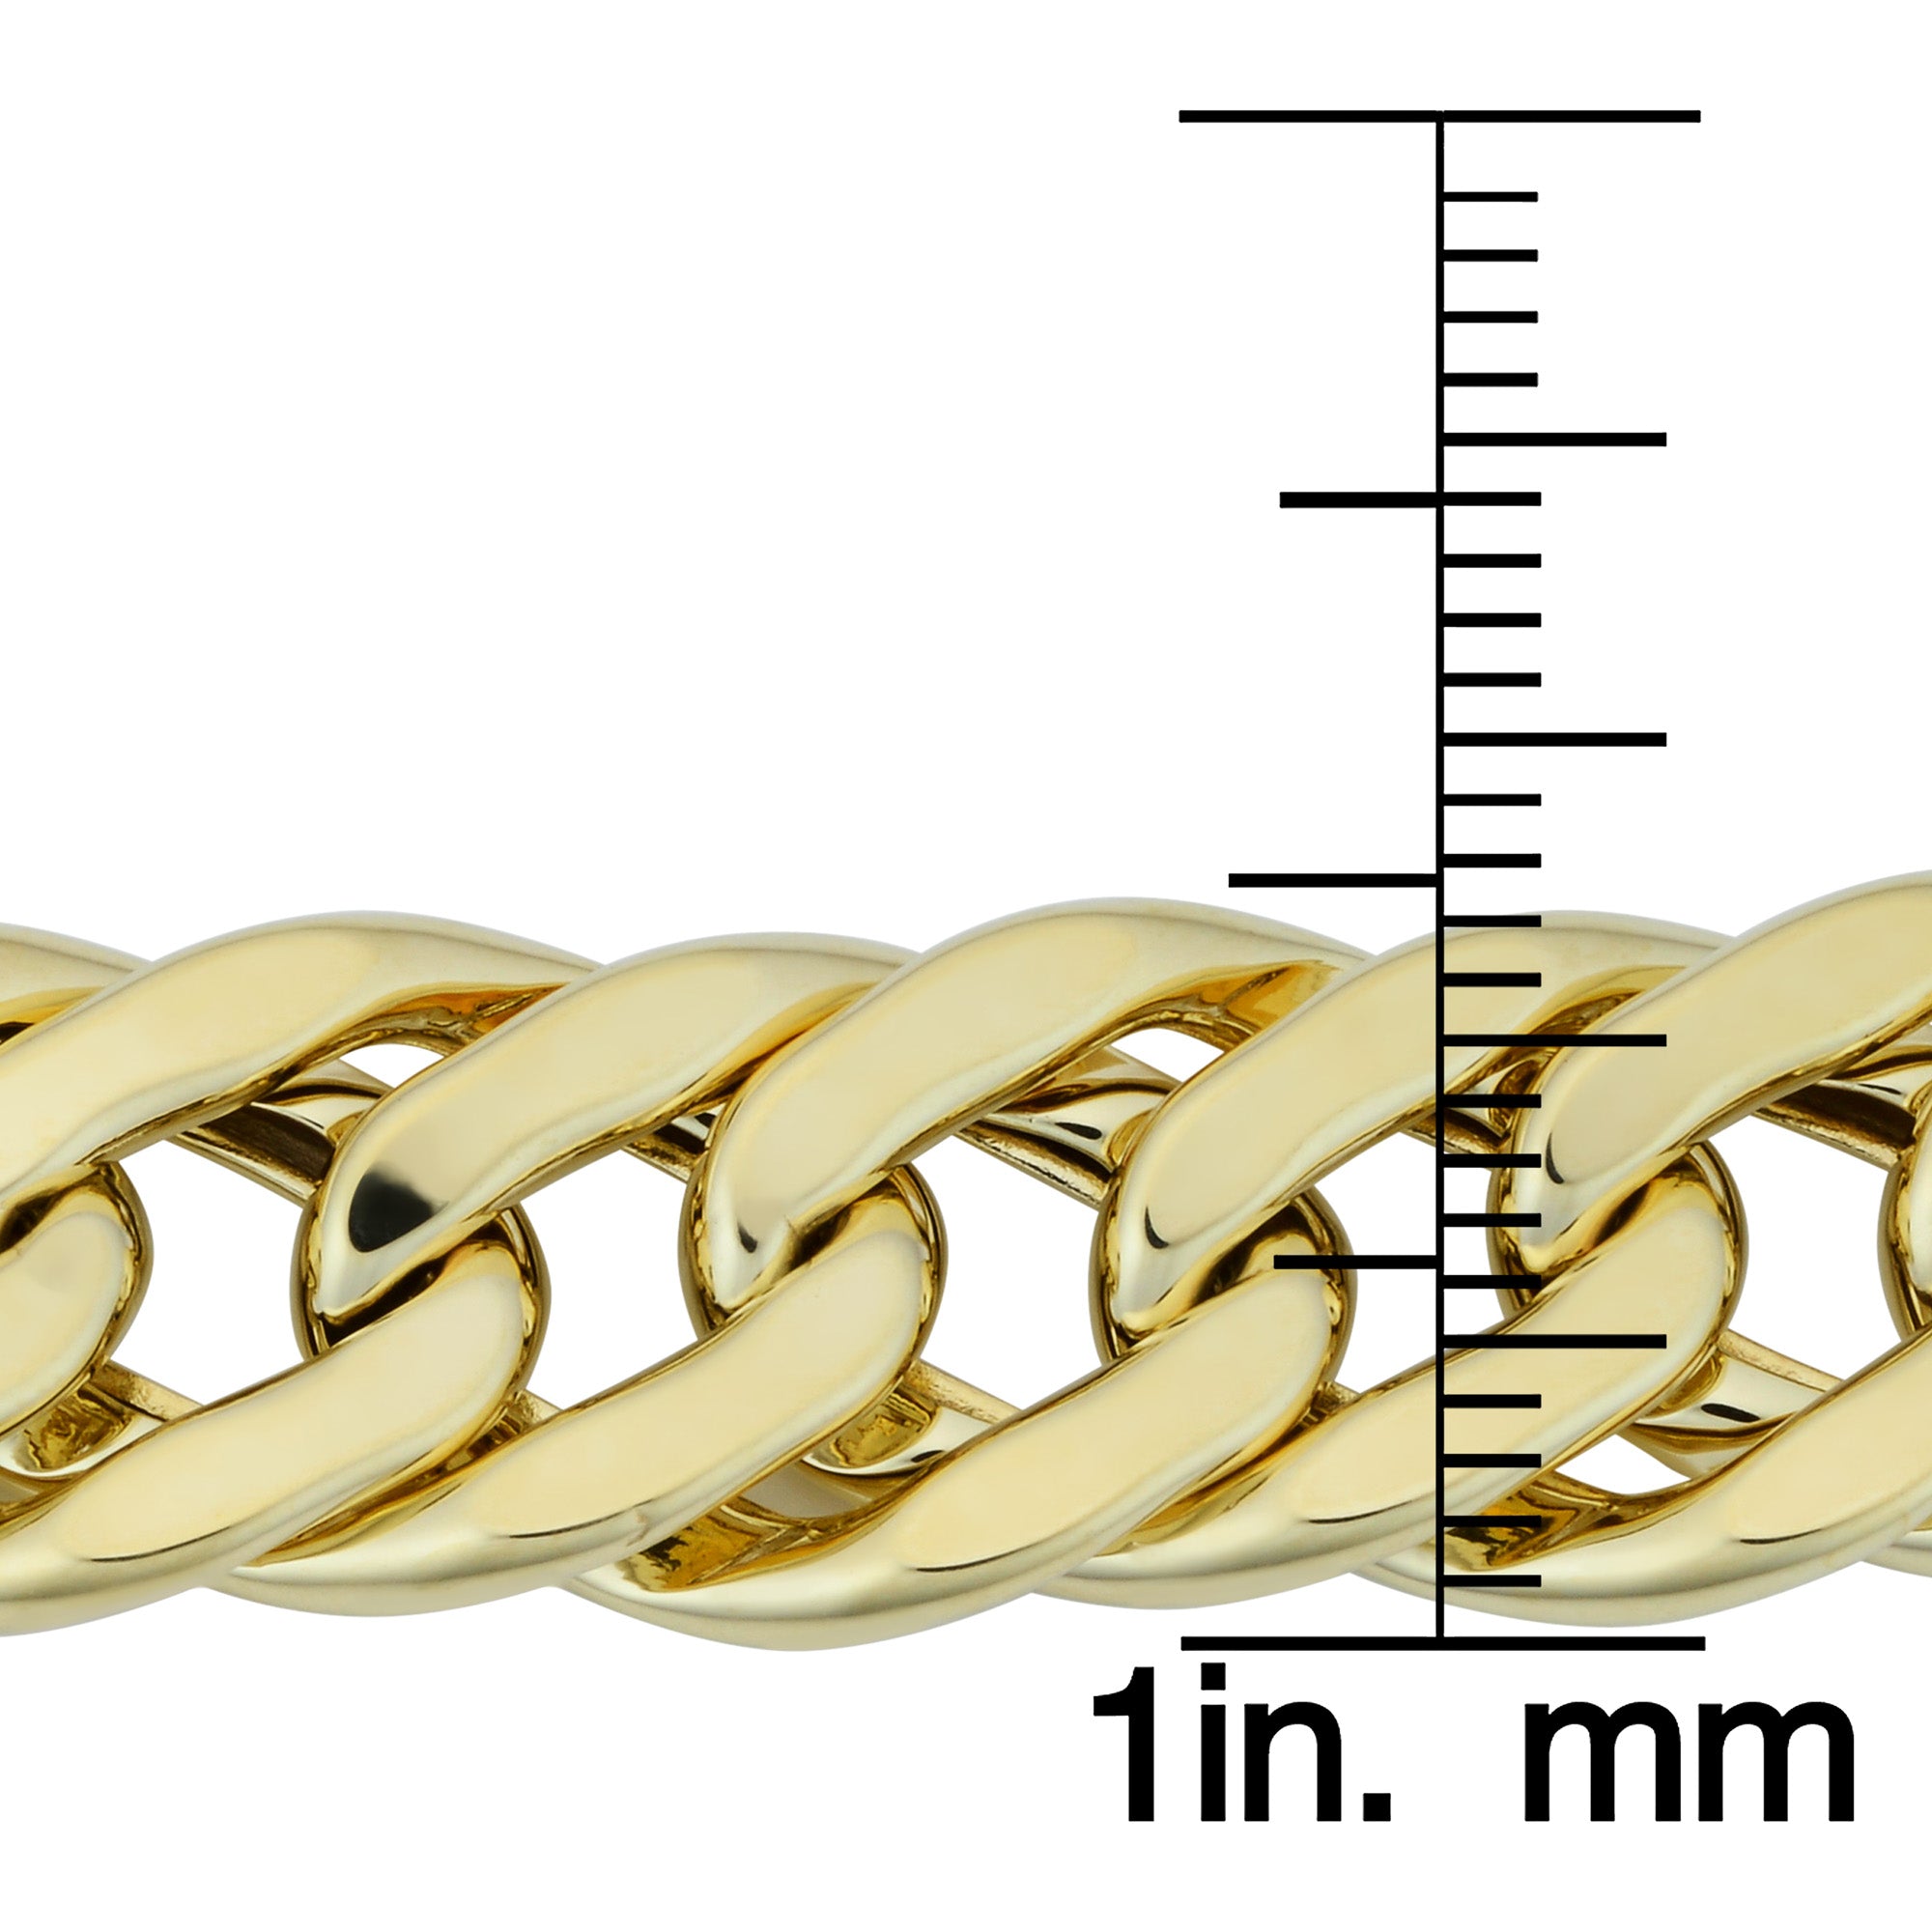 14k Yellow Gold Semi Solid Curb Chain Bracelet, 7.5" fine designer jewelry for men and women